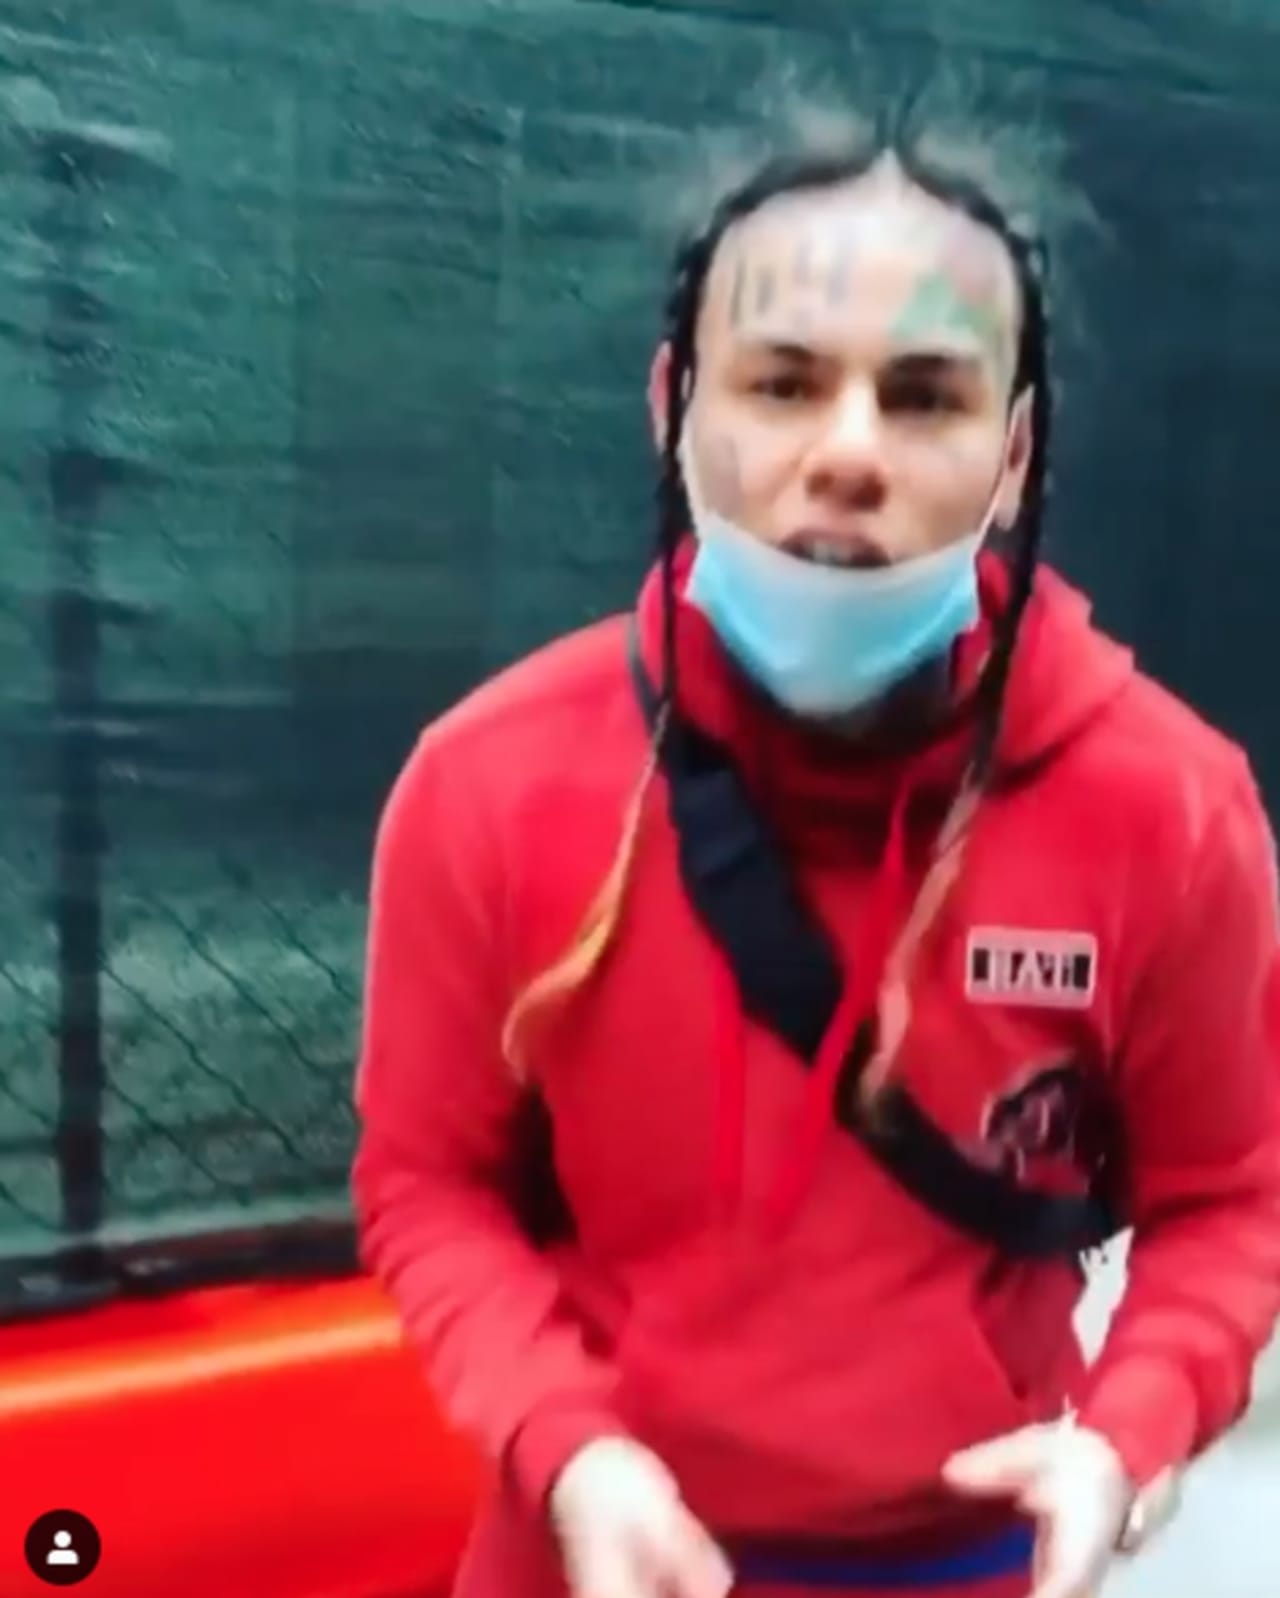 6ix9ine made a recent visit to a Bergen County mall that ended with the “TROLLZ” rapper running through the streets with his security team, reports say.